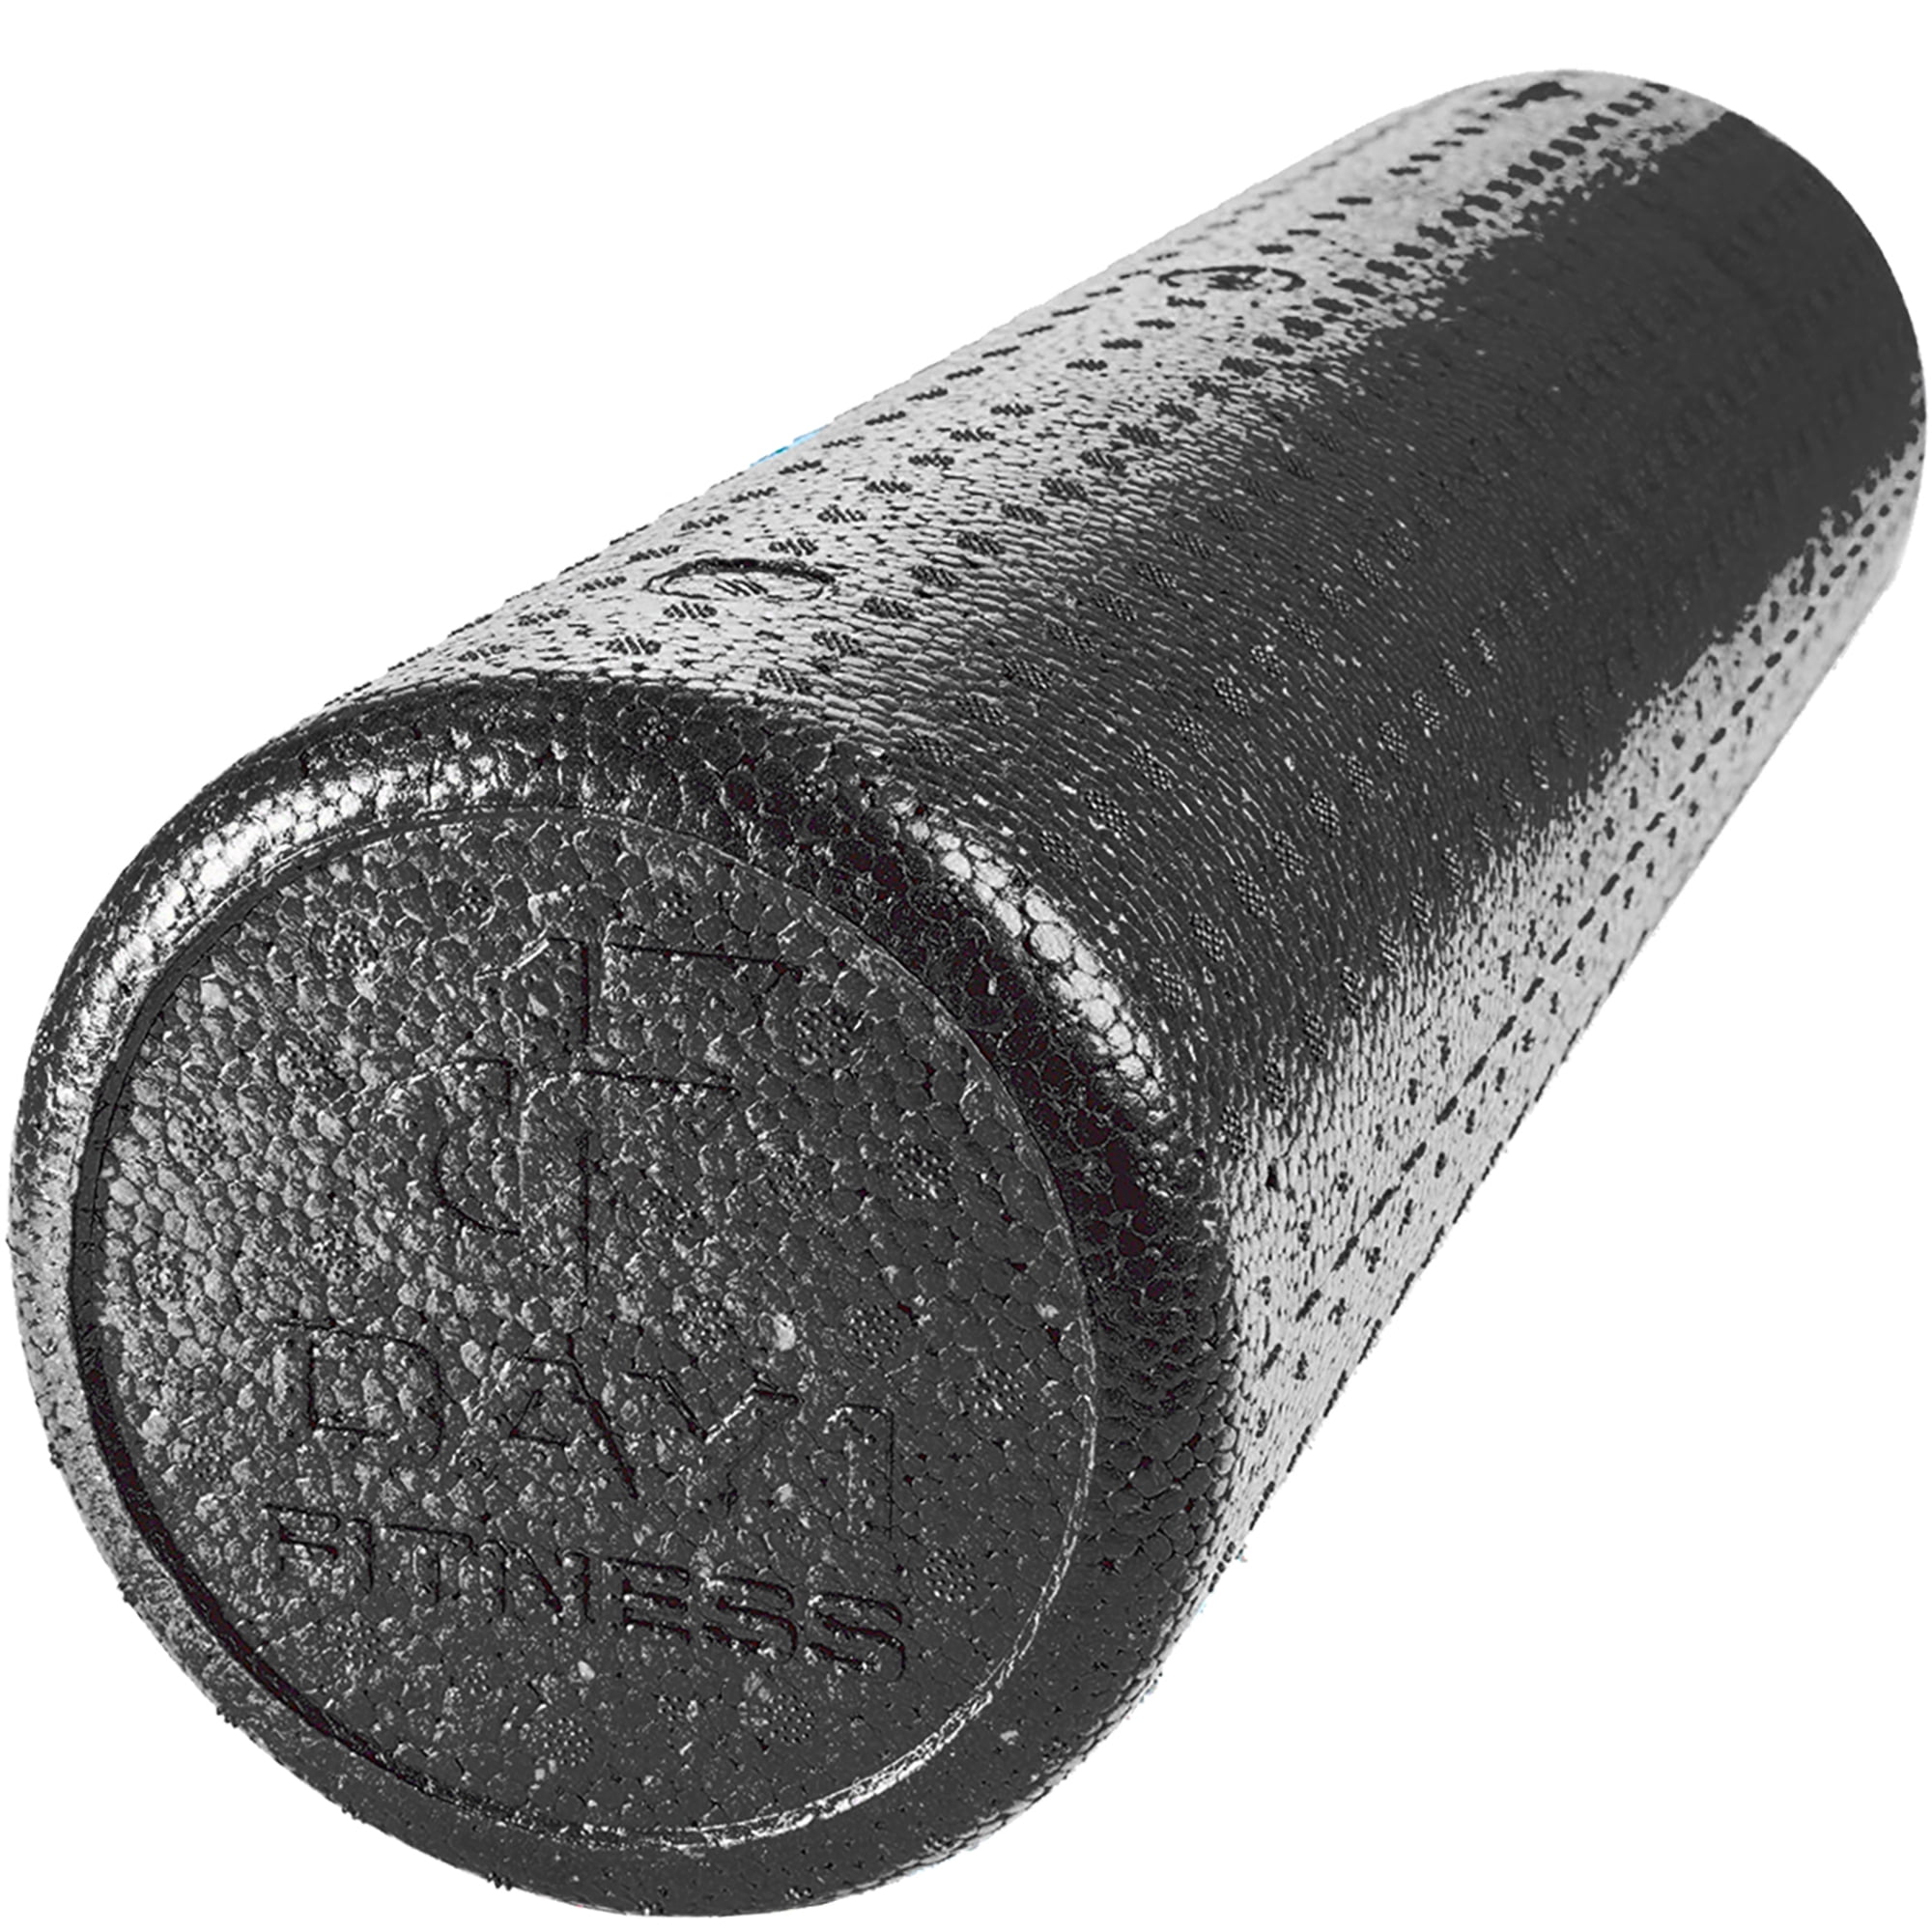 Black Mountain Products High Density Foam Roller Extra Firm - 24in